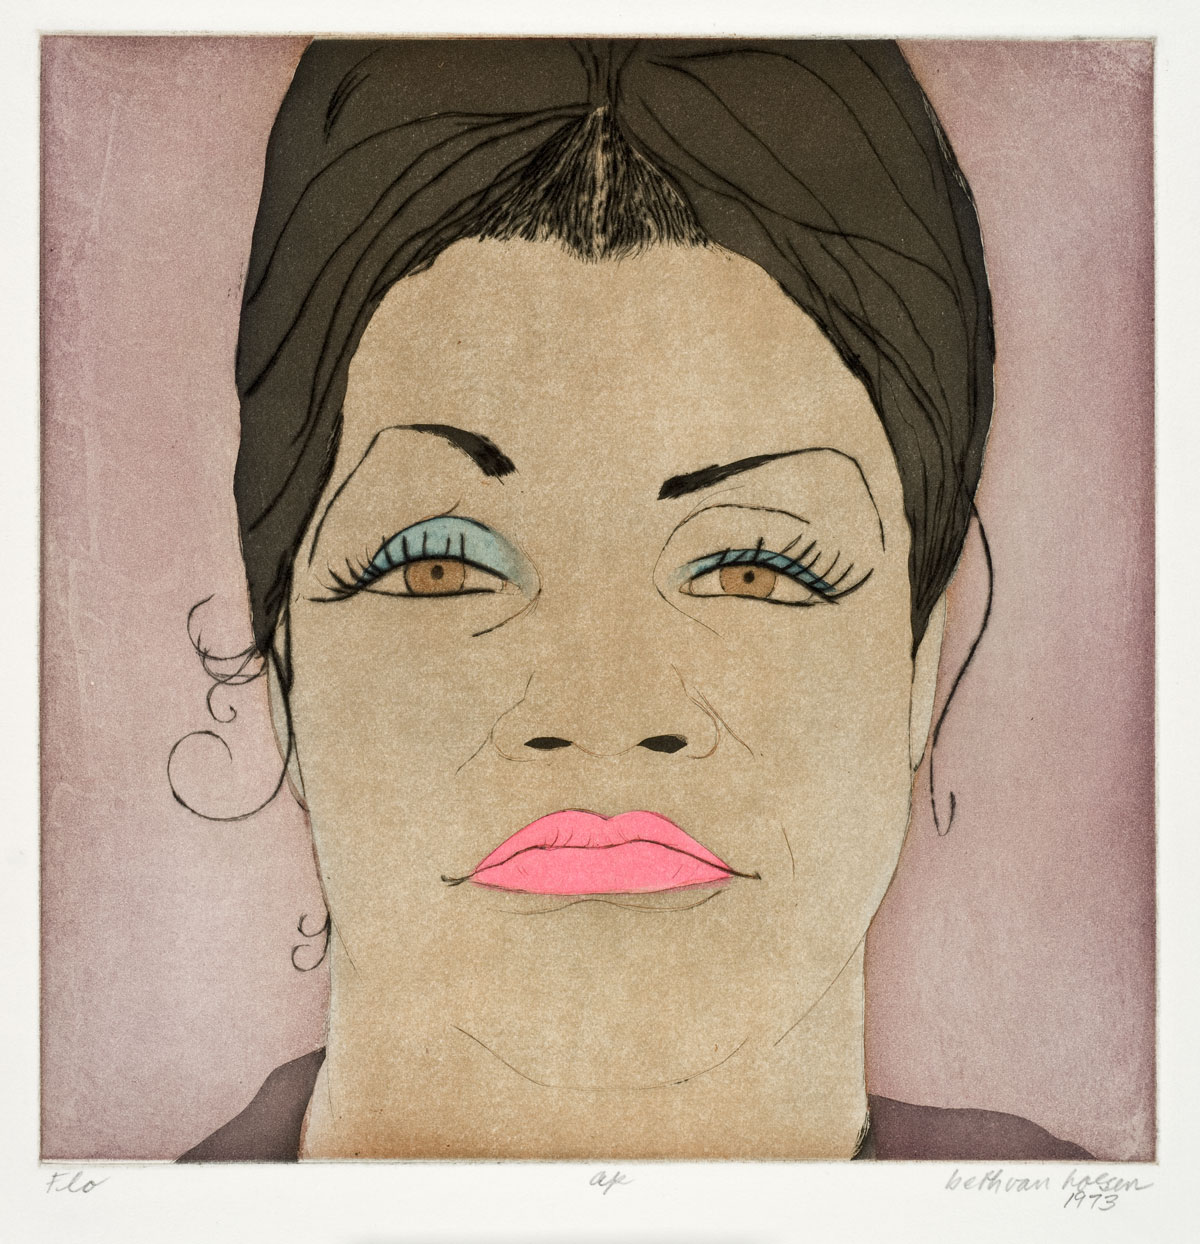 Print of woman's face, pink lips, blue eyeshadow, brown hair up